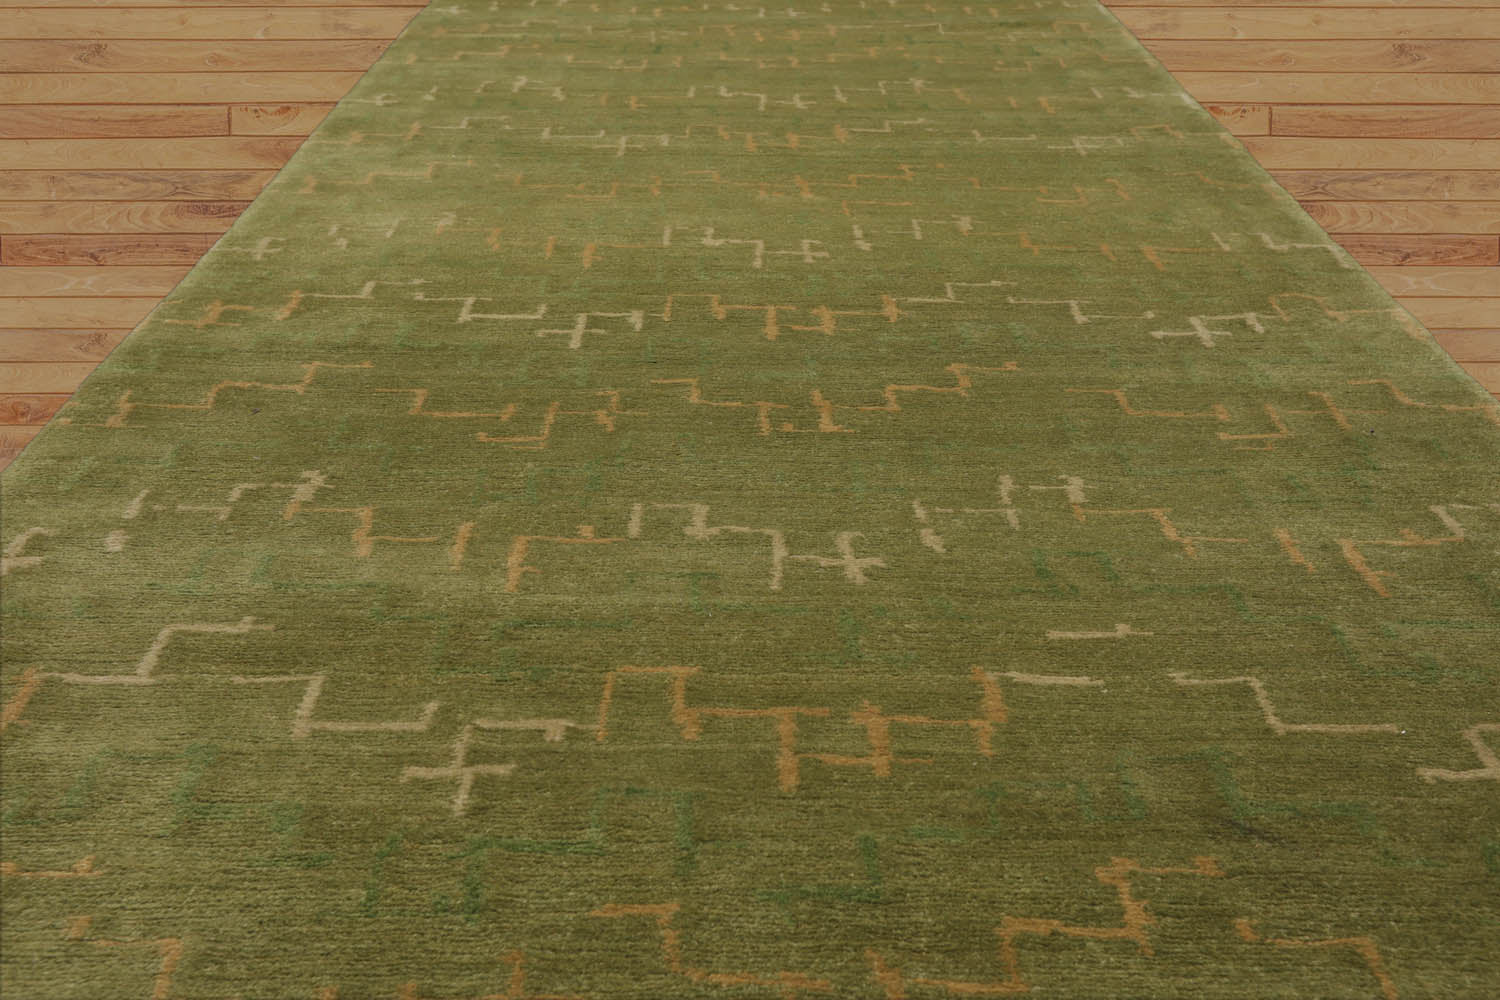 Elyna Runner Hand Knotted Tibetan 100% Wool Michaelian & Kohlberg Traditional Oriental Area Rug Lime, Light Gold Color